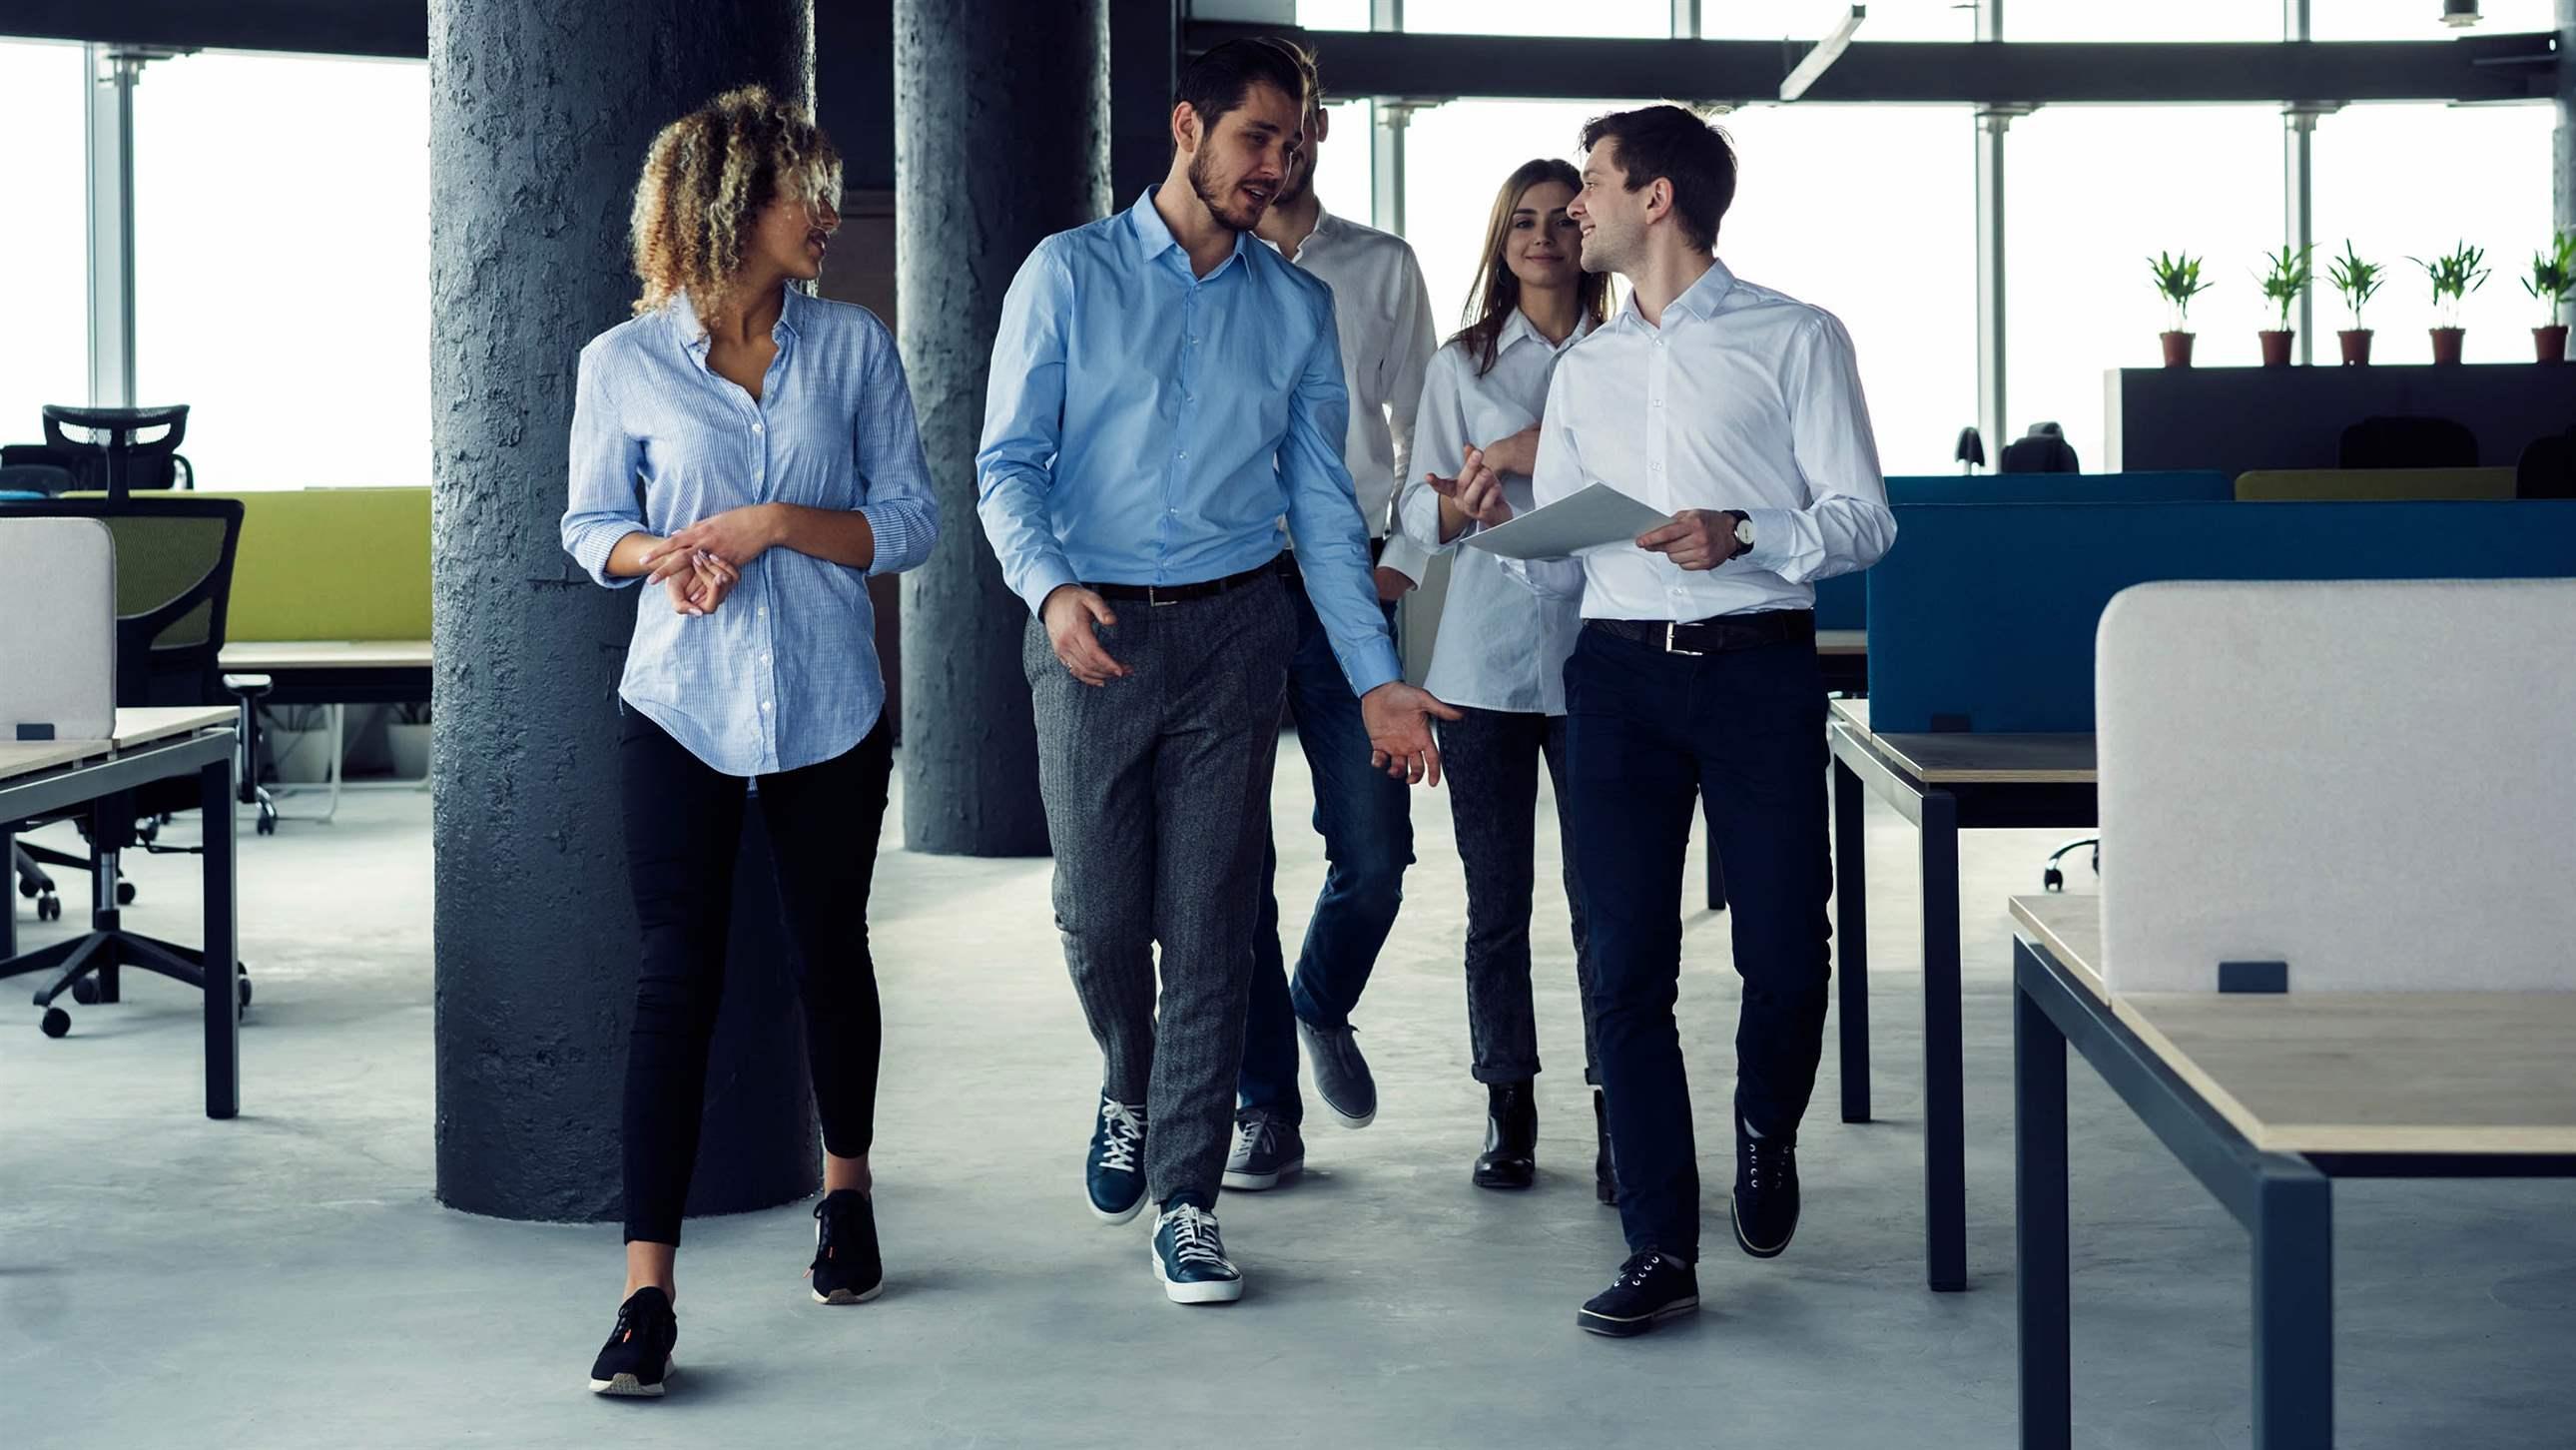 Taking their business on the move. Full length of young modern people in smart casual wear having a discussion while walking through the large modern office